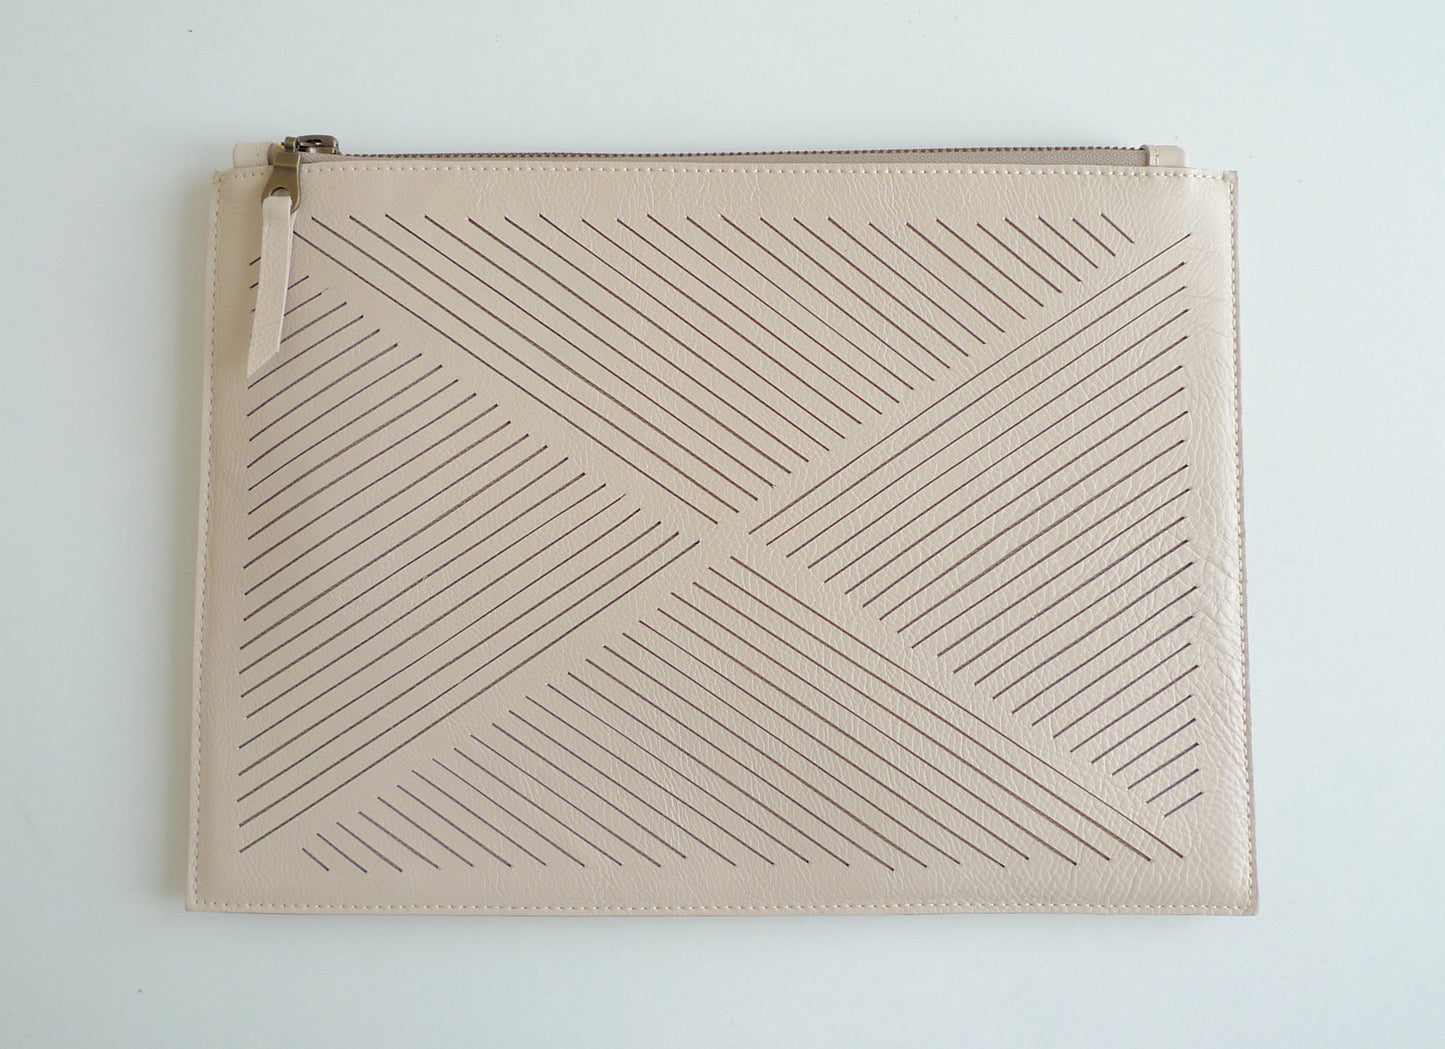 Cut out Clutch - Ivory